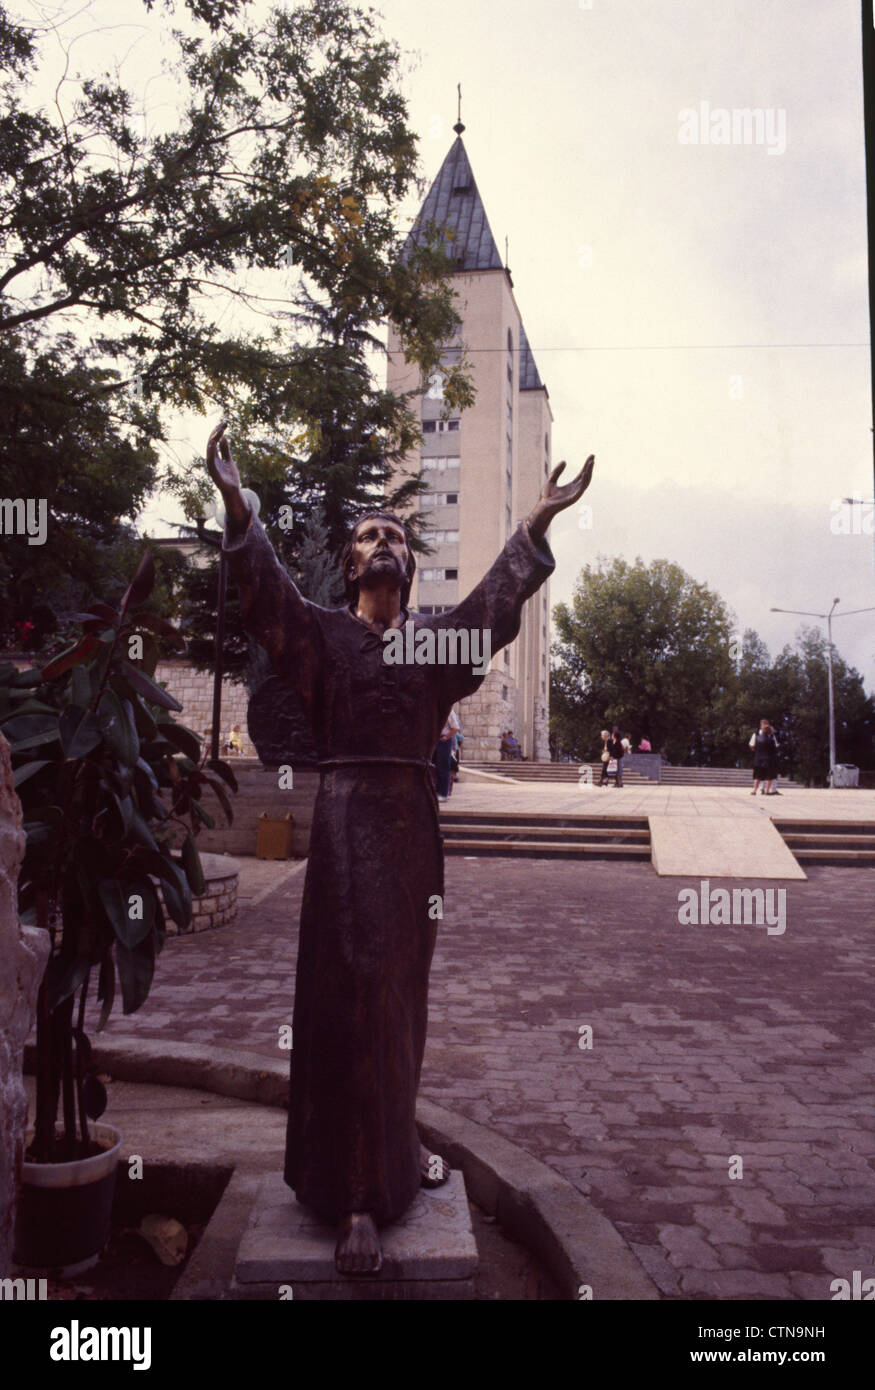 Medjugorje, a village in Herzegovina where Our Lady appeared. October 1988, archival photographs. Stock Photo